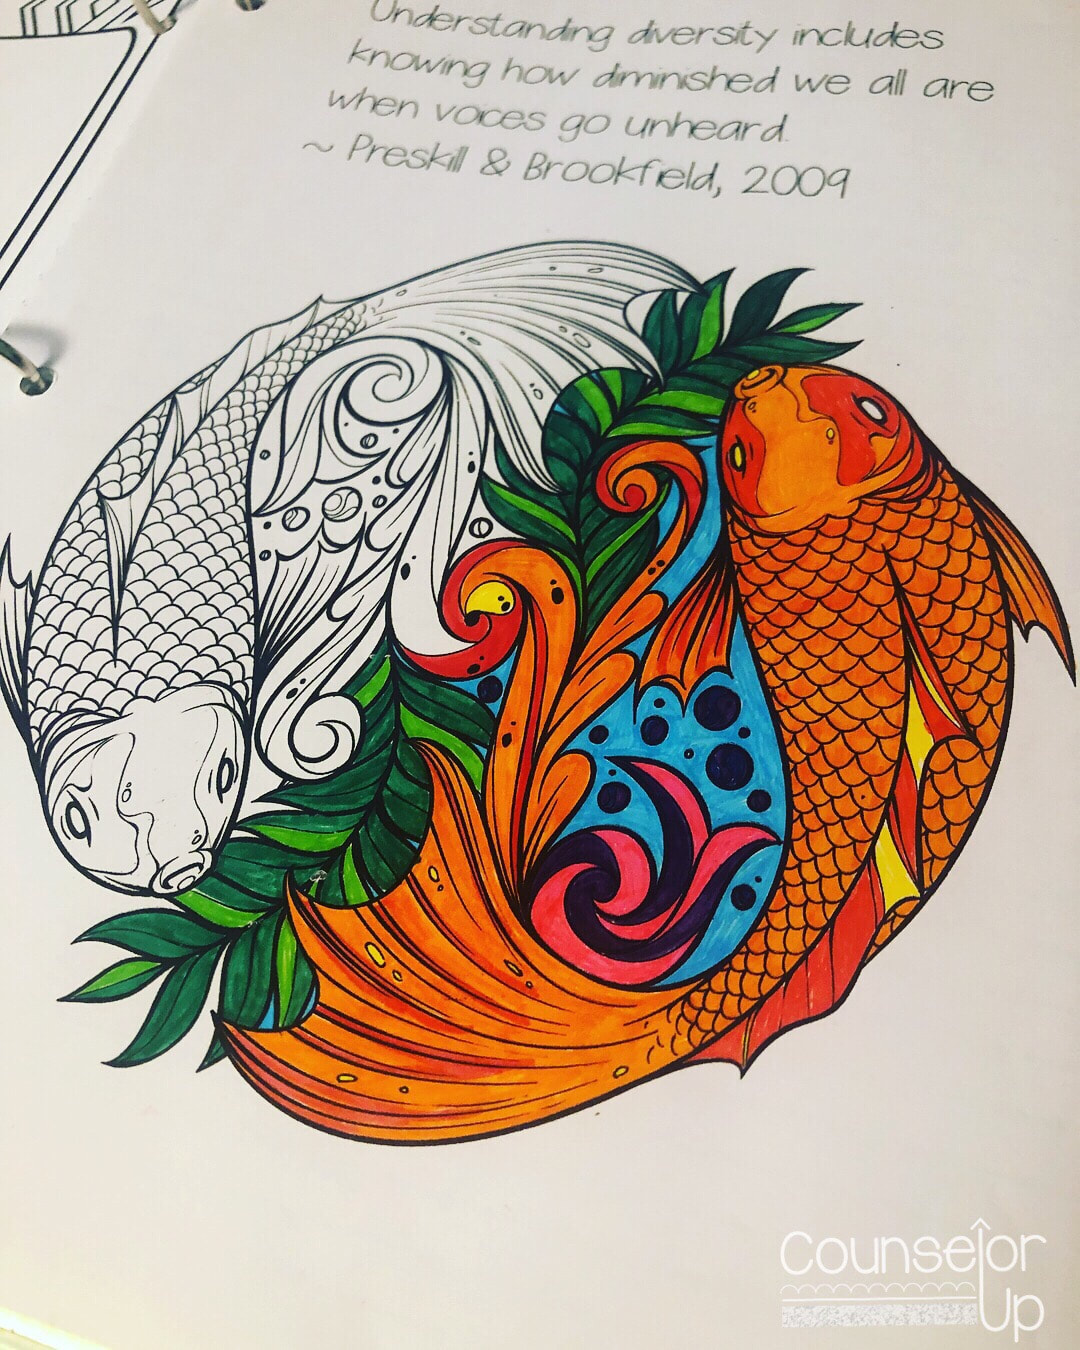 Counselor Planner 2016-17 The entire planner has lots of doodling and art areas including mandala coloring pages with quotes. Helps when you're sitting in those super long staff meetings! www.counselorup.com